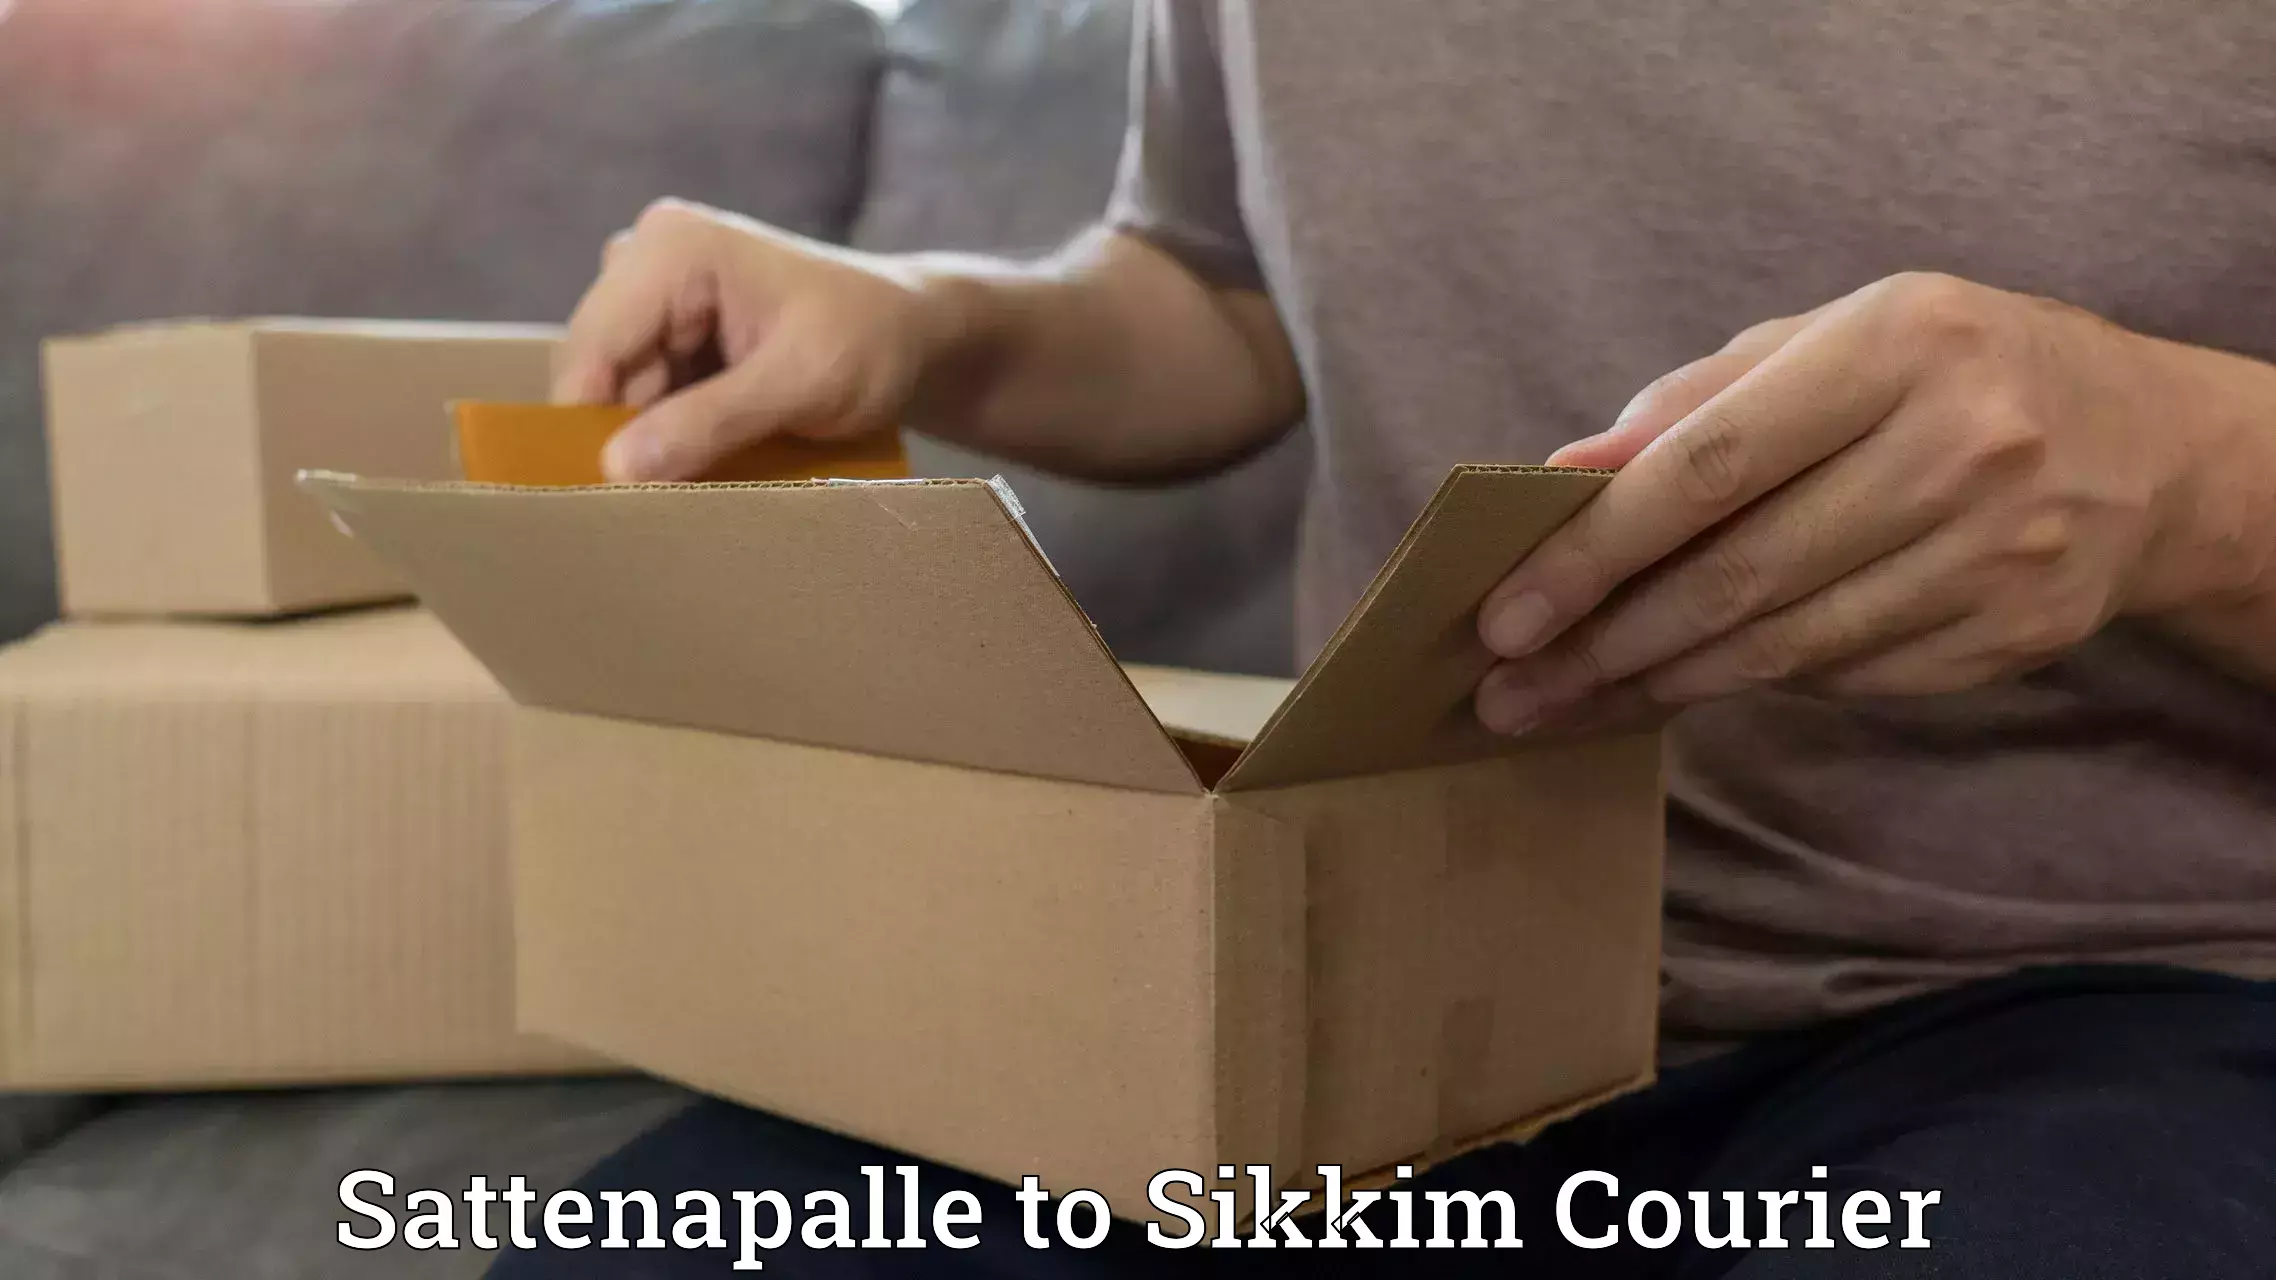 Professional courier handling Sattenapalle to Mangan